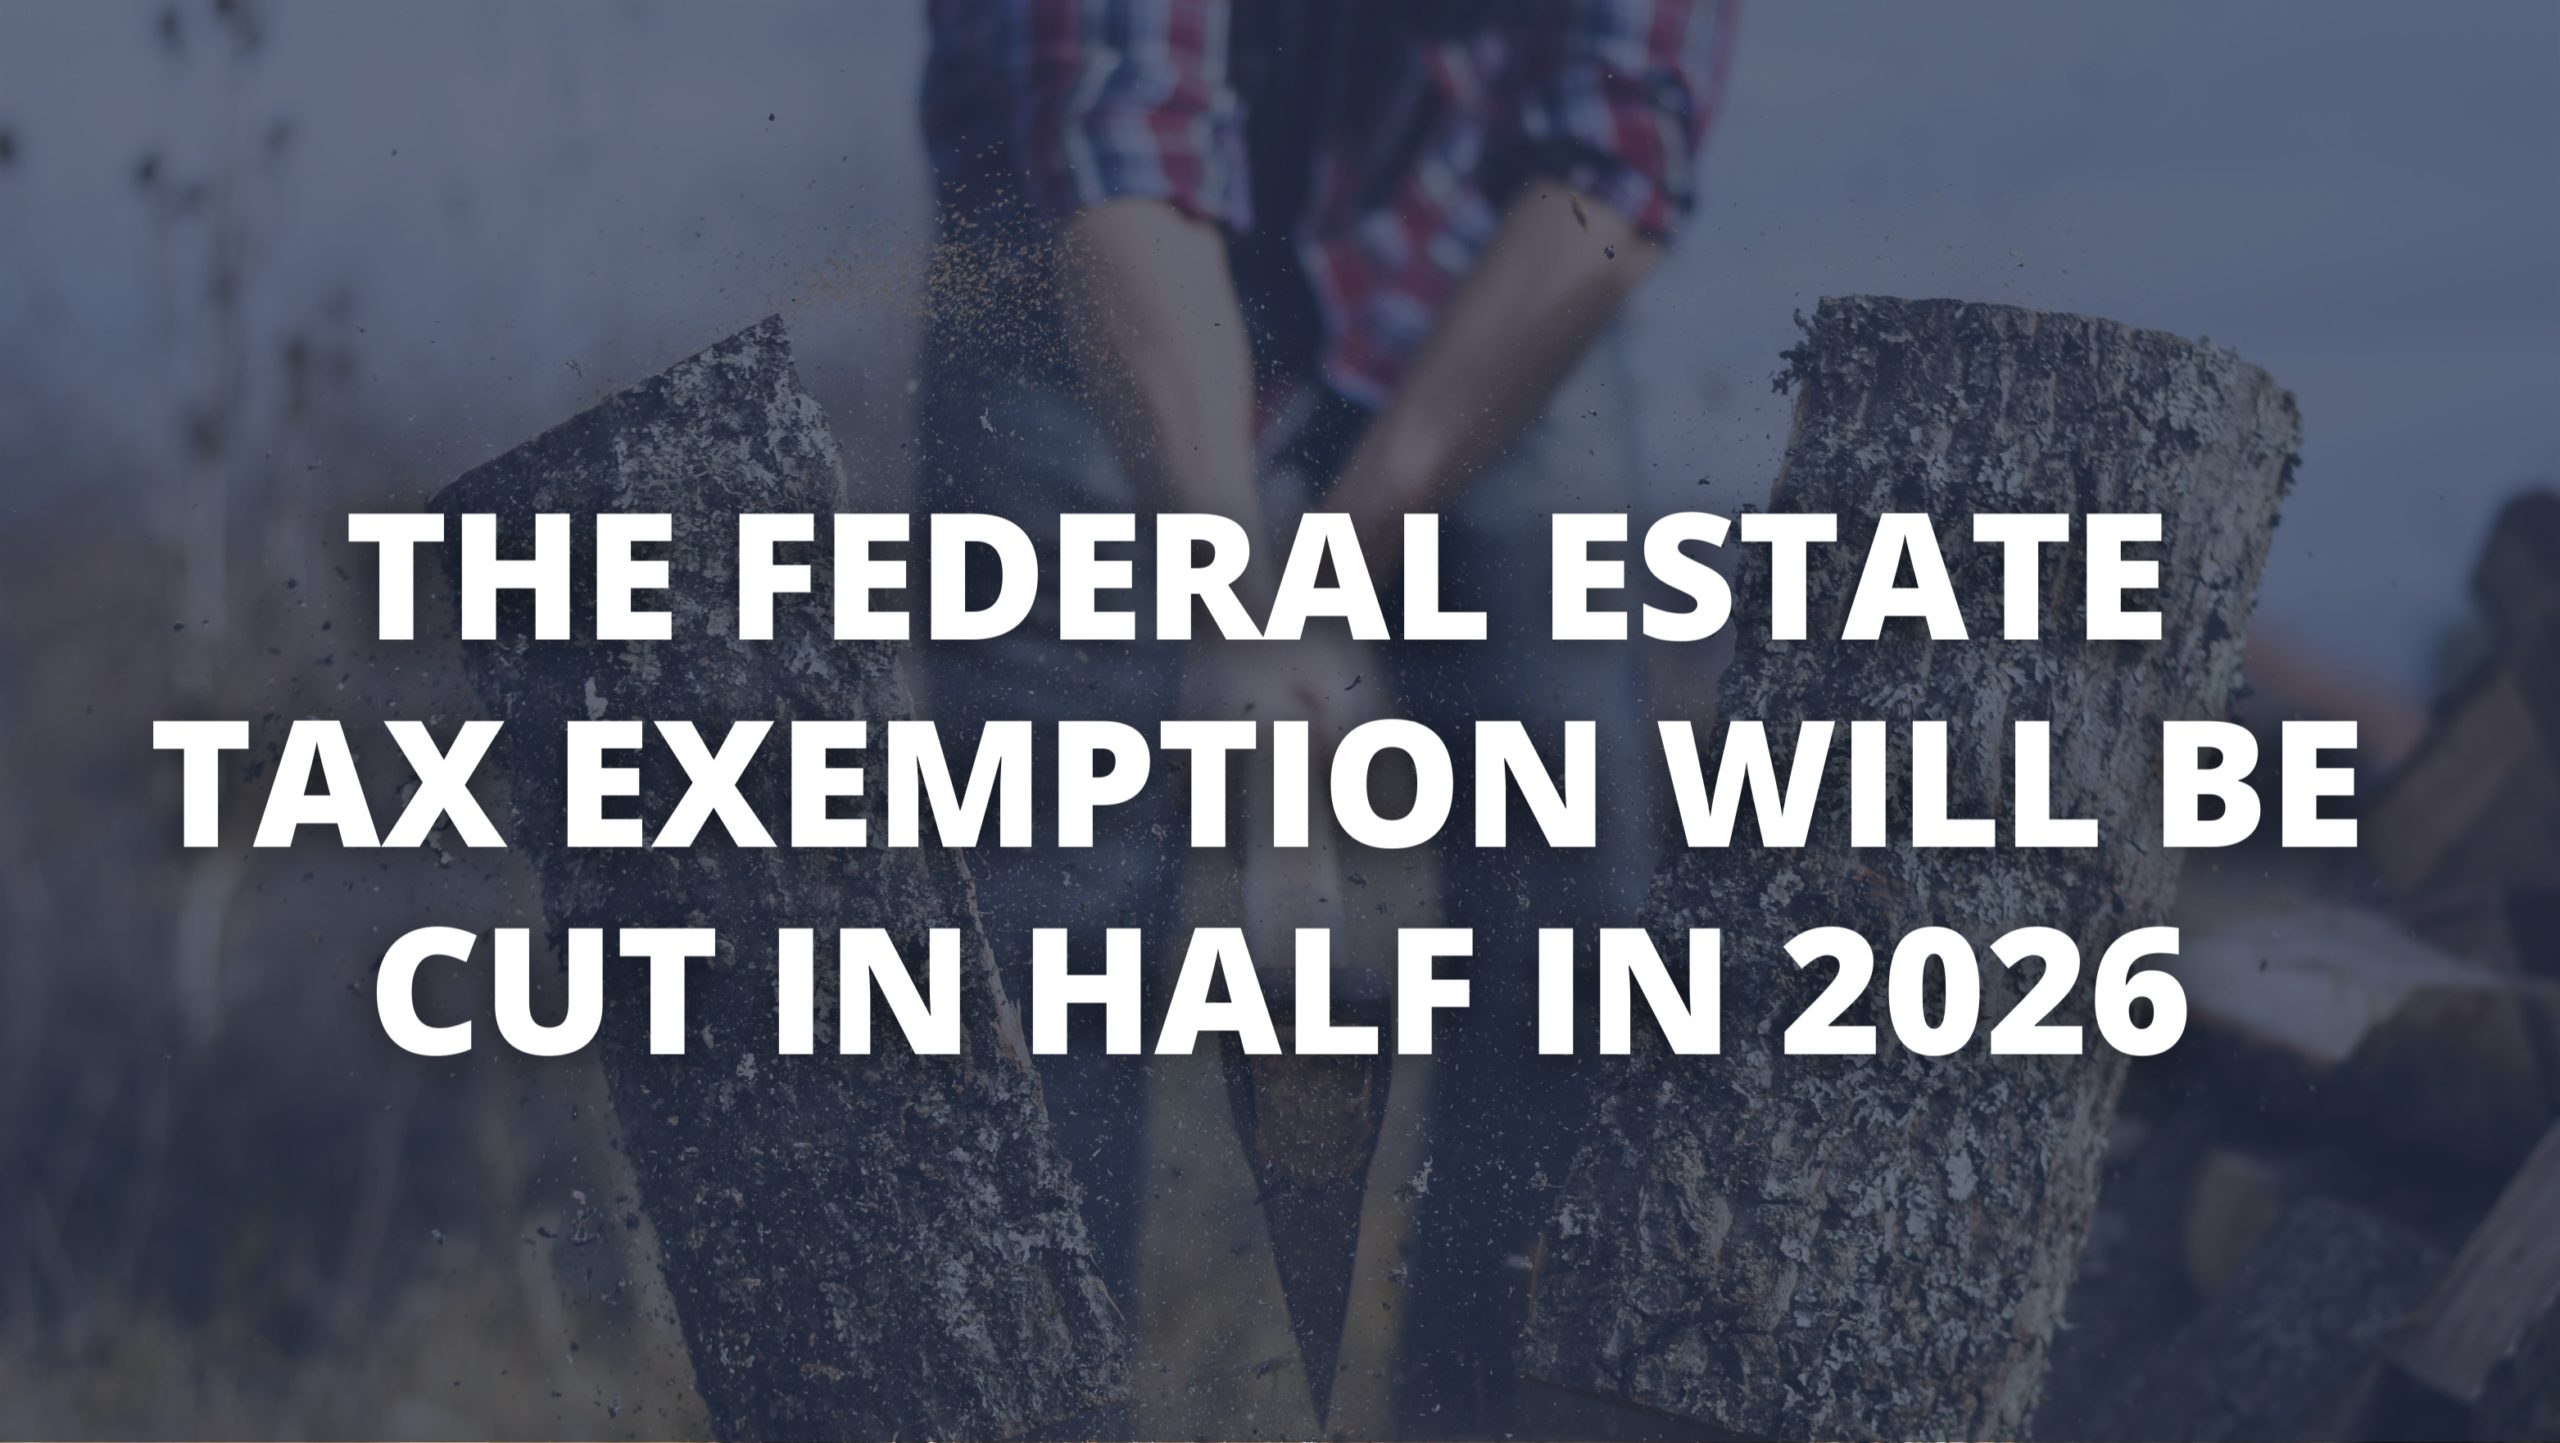 Federal Estate Tax Exemption Sunset The Sun Is Still Up, But It’s